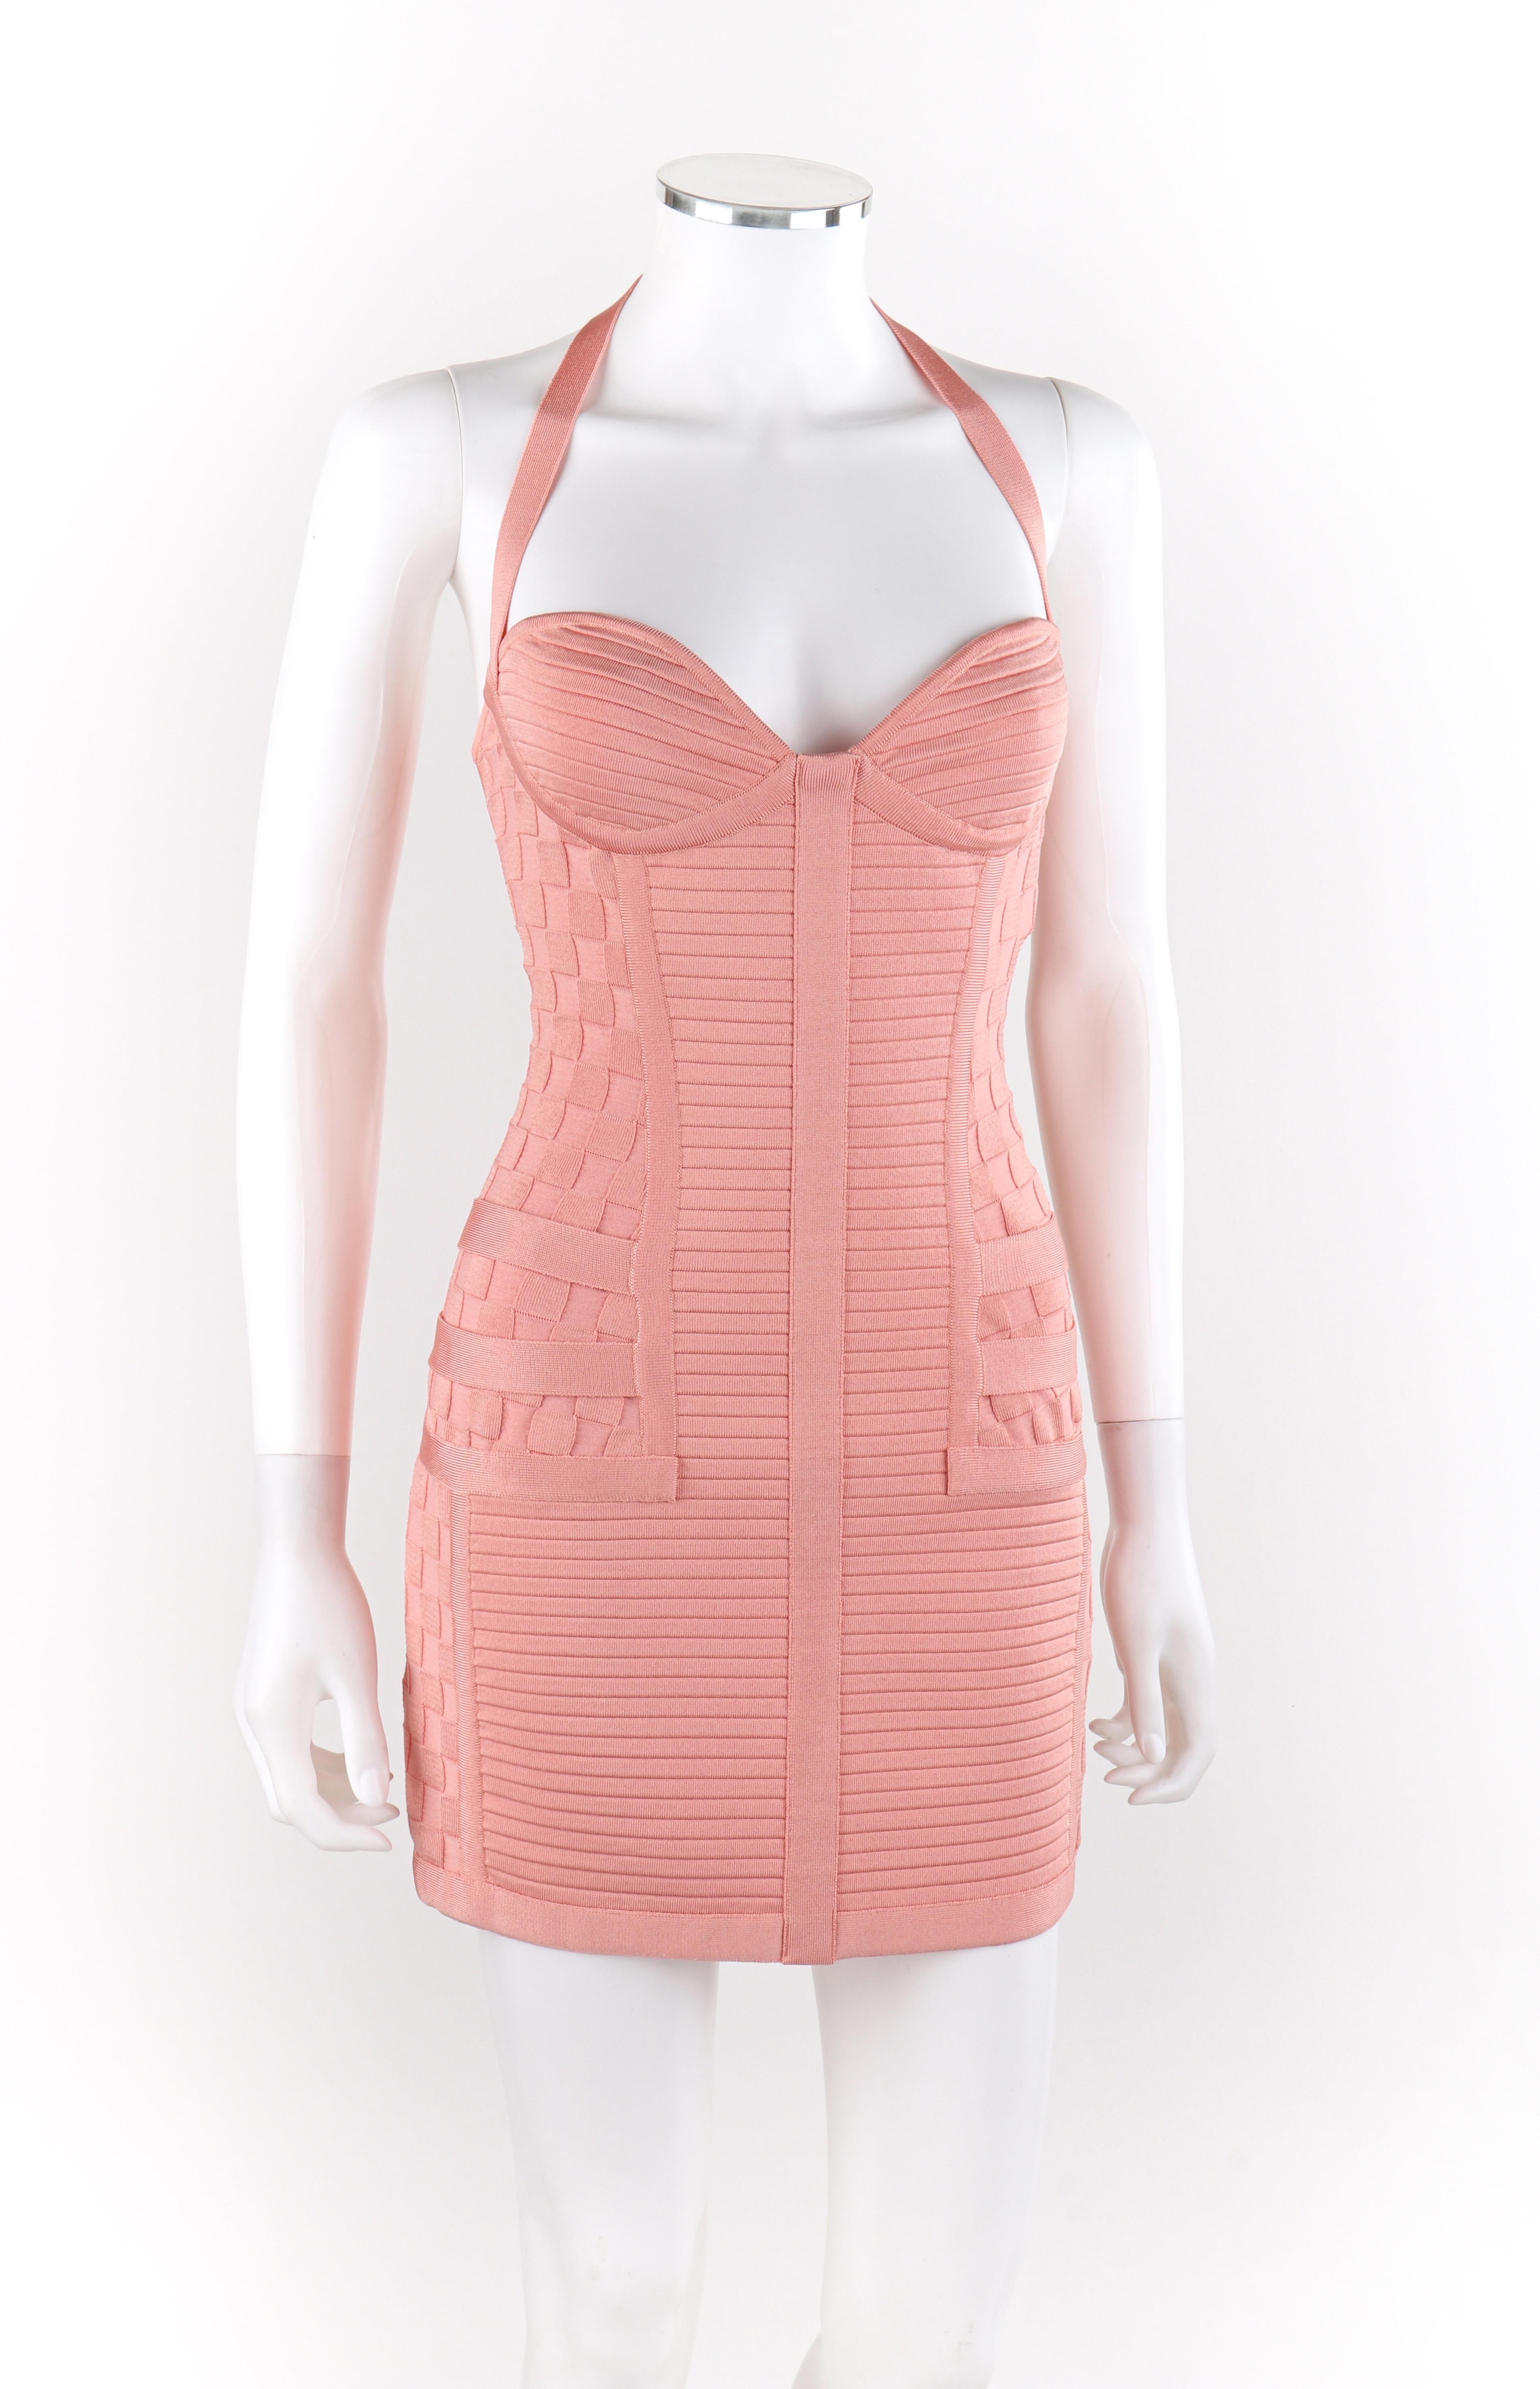 BALMAIN Pre Fall 2016 Pink Bandage Paneled Bodycon Mini Dress NWT

Brand / Manufacturer: Balmain
Collection: Pre Fall 2016
Designer: Olivier Rousteing
Style: Bandage bodycon mini dress
Color(s): Shade(s) of pink
Lined: No
Marked Fabric Content: “89%